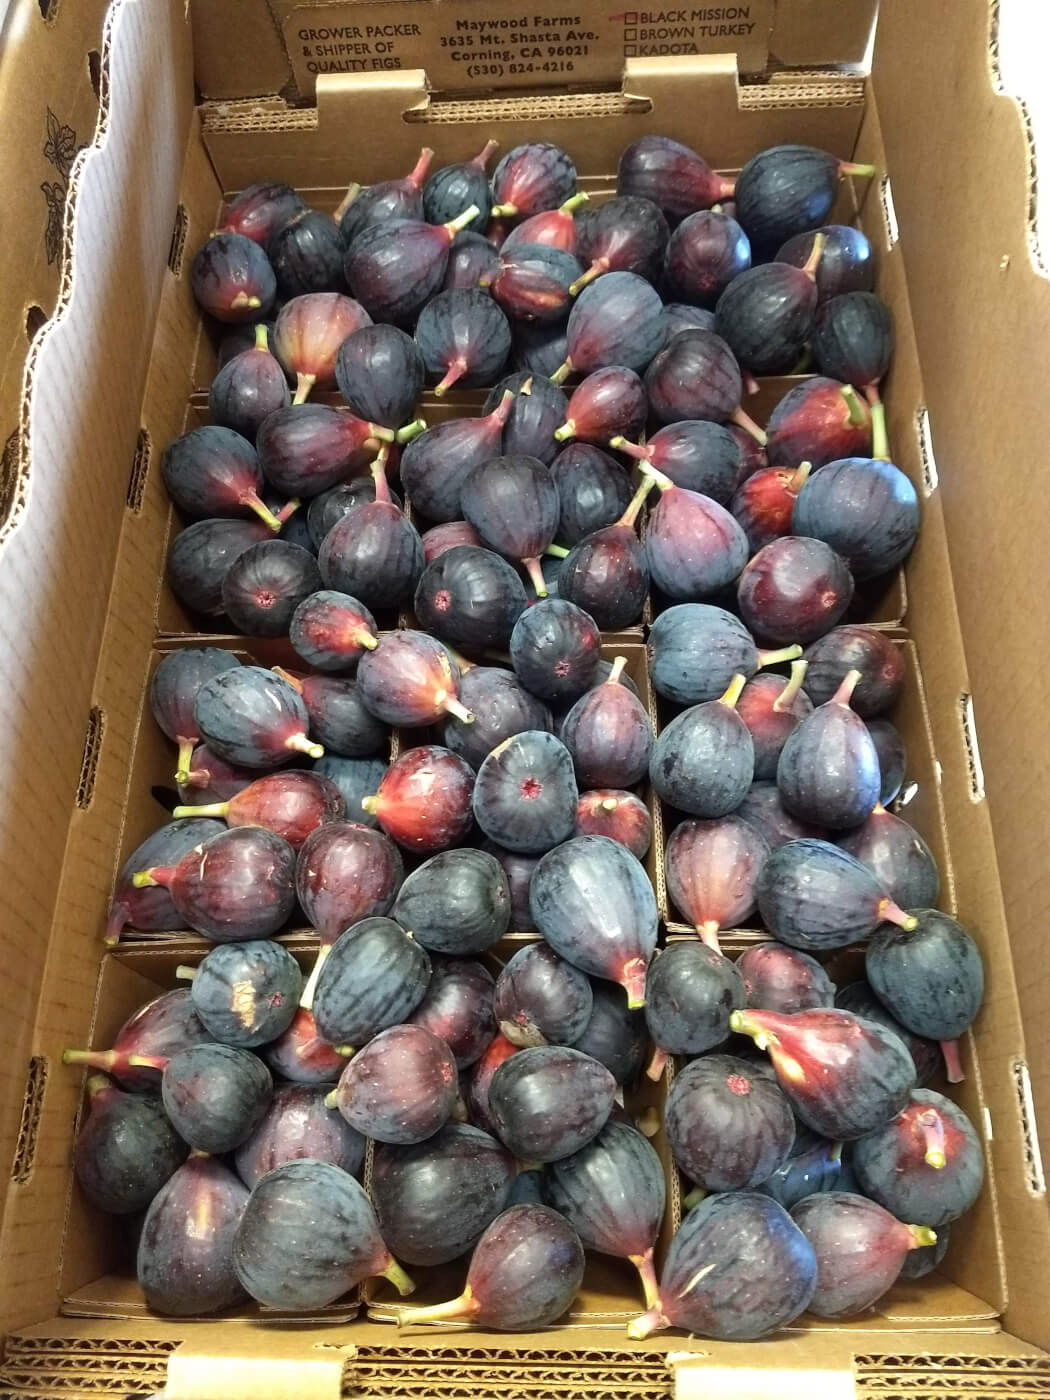 Harvested figs in a box